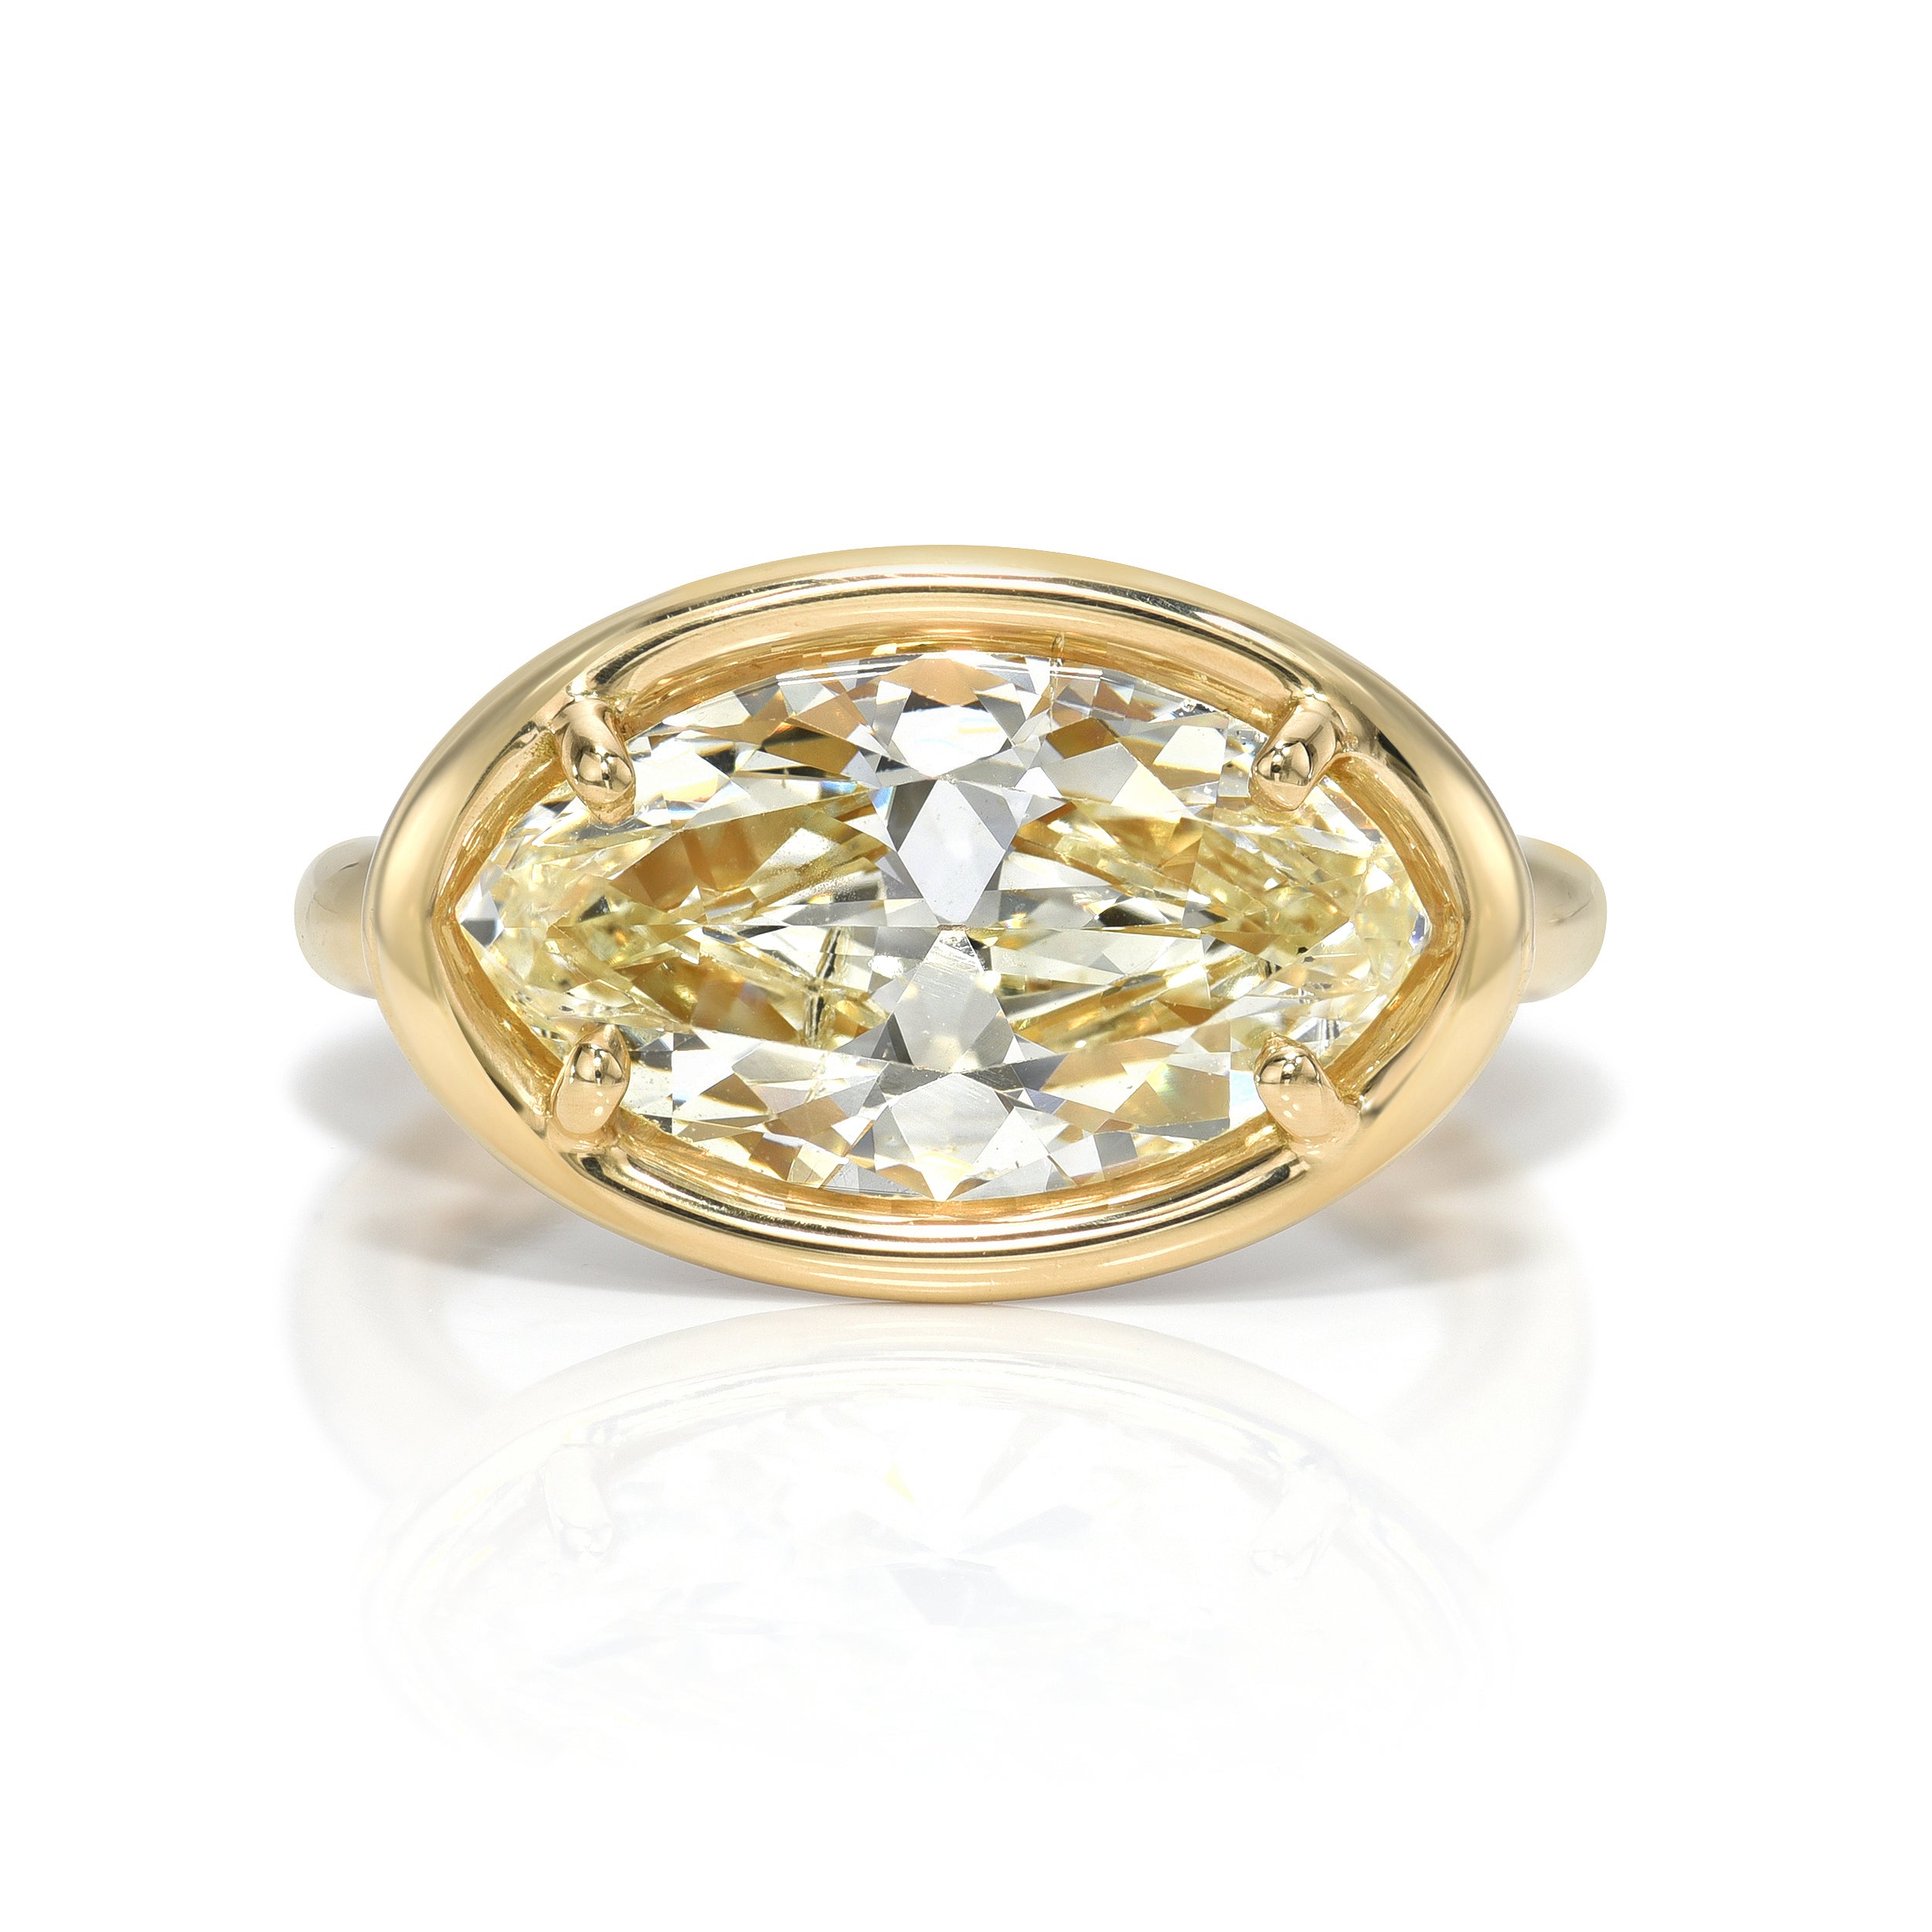 SINGLE STONE DEVI RING featuring 4.23ct S-T/SI2 GIA certified marquise cut diamond with 0.95ctw old European cut accent diamonds prong set in a handcrafted 18K yellow gold mounting.